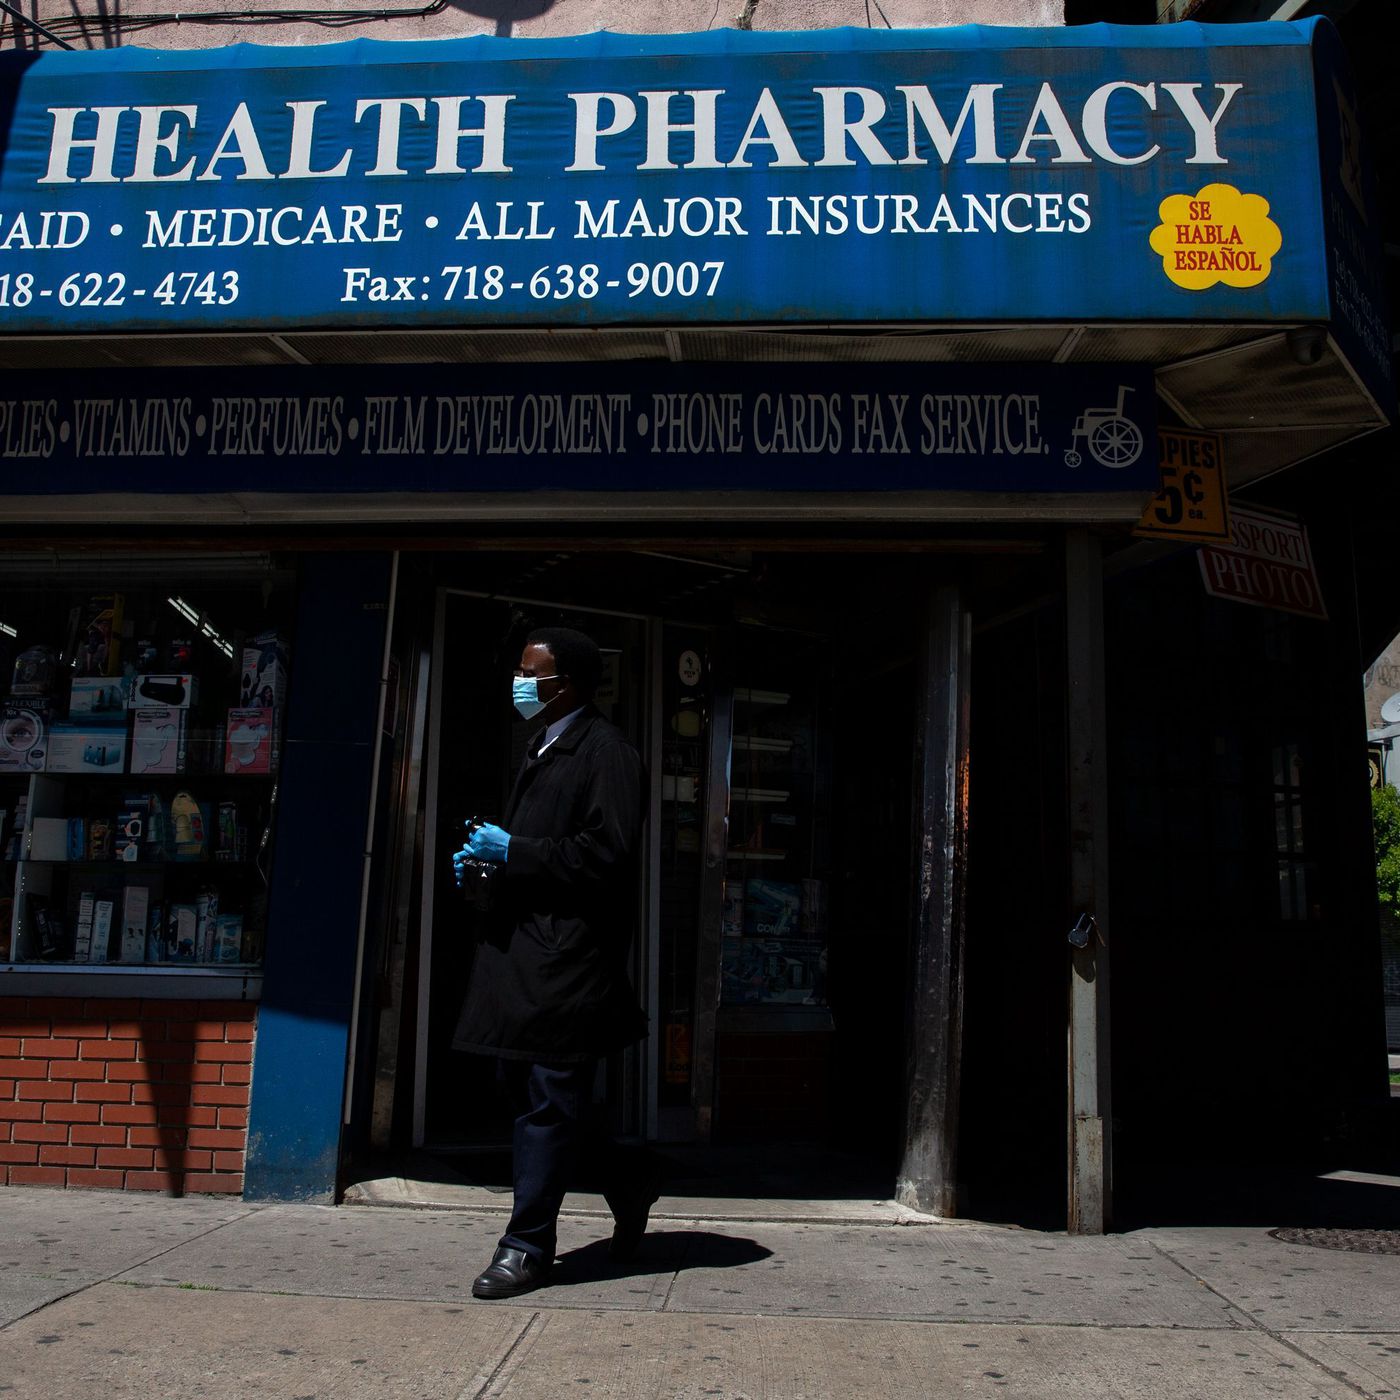 Cuomos Pharmacy Covid Testing Prescription Remains Unfilled - The City